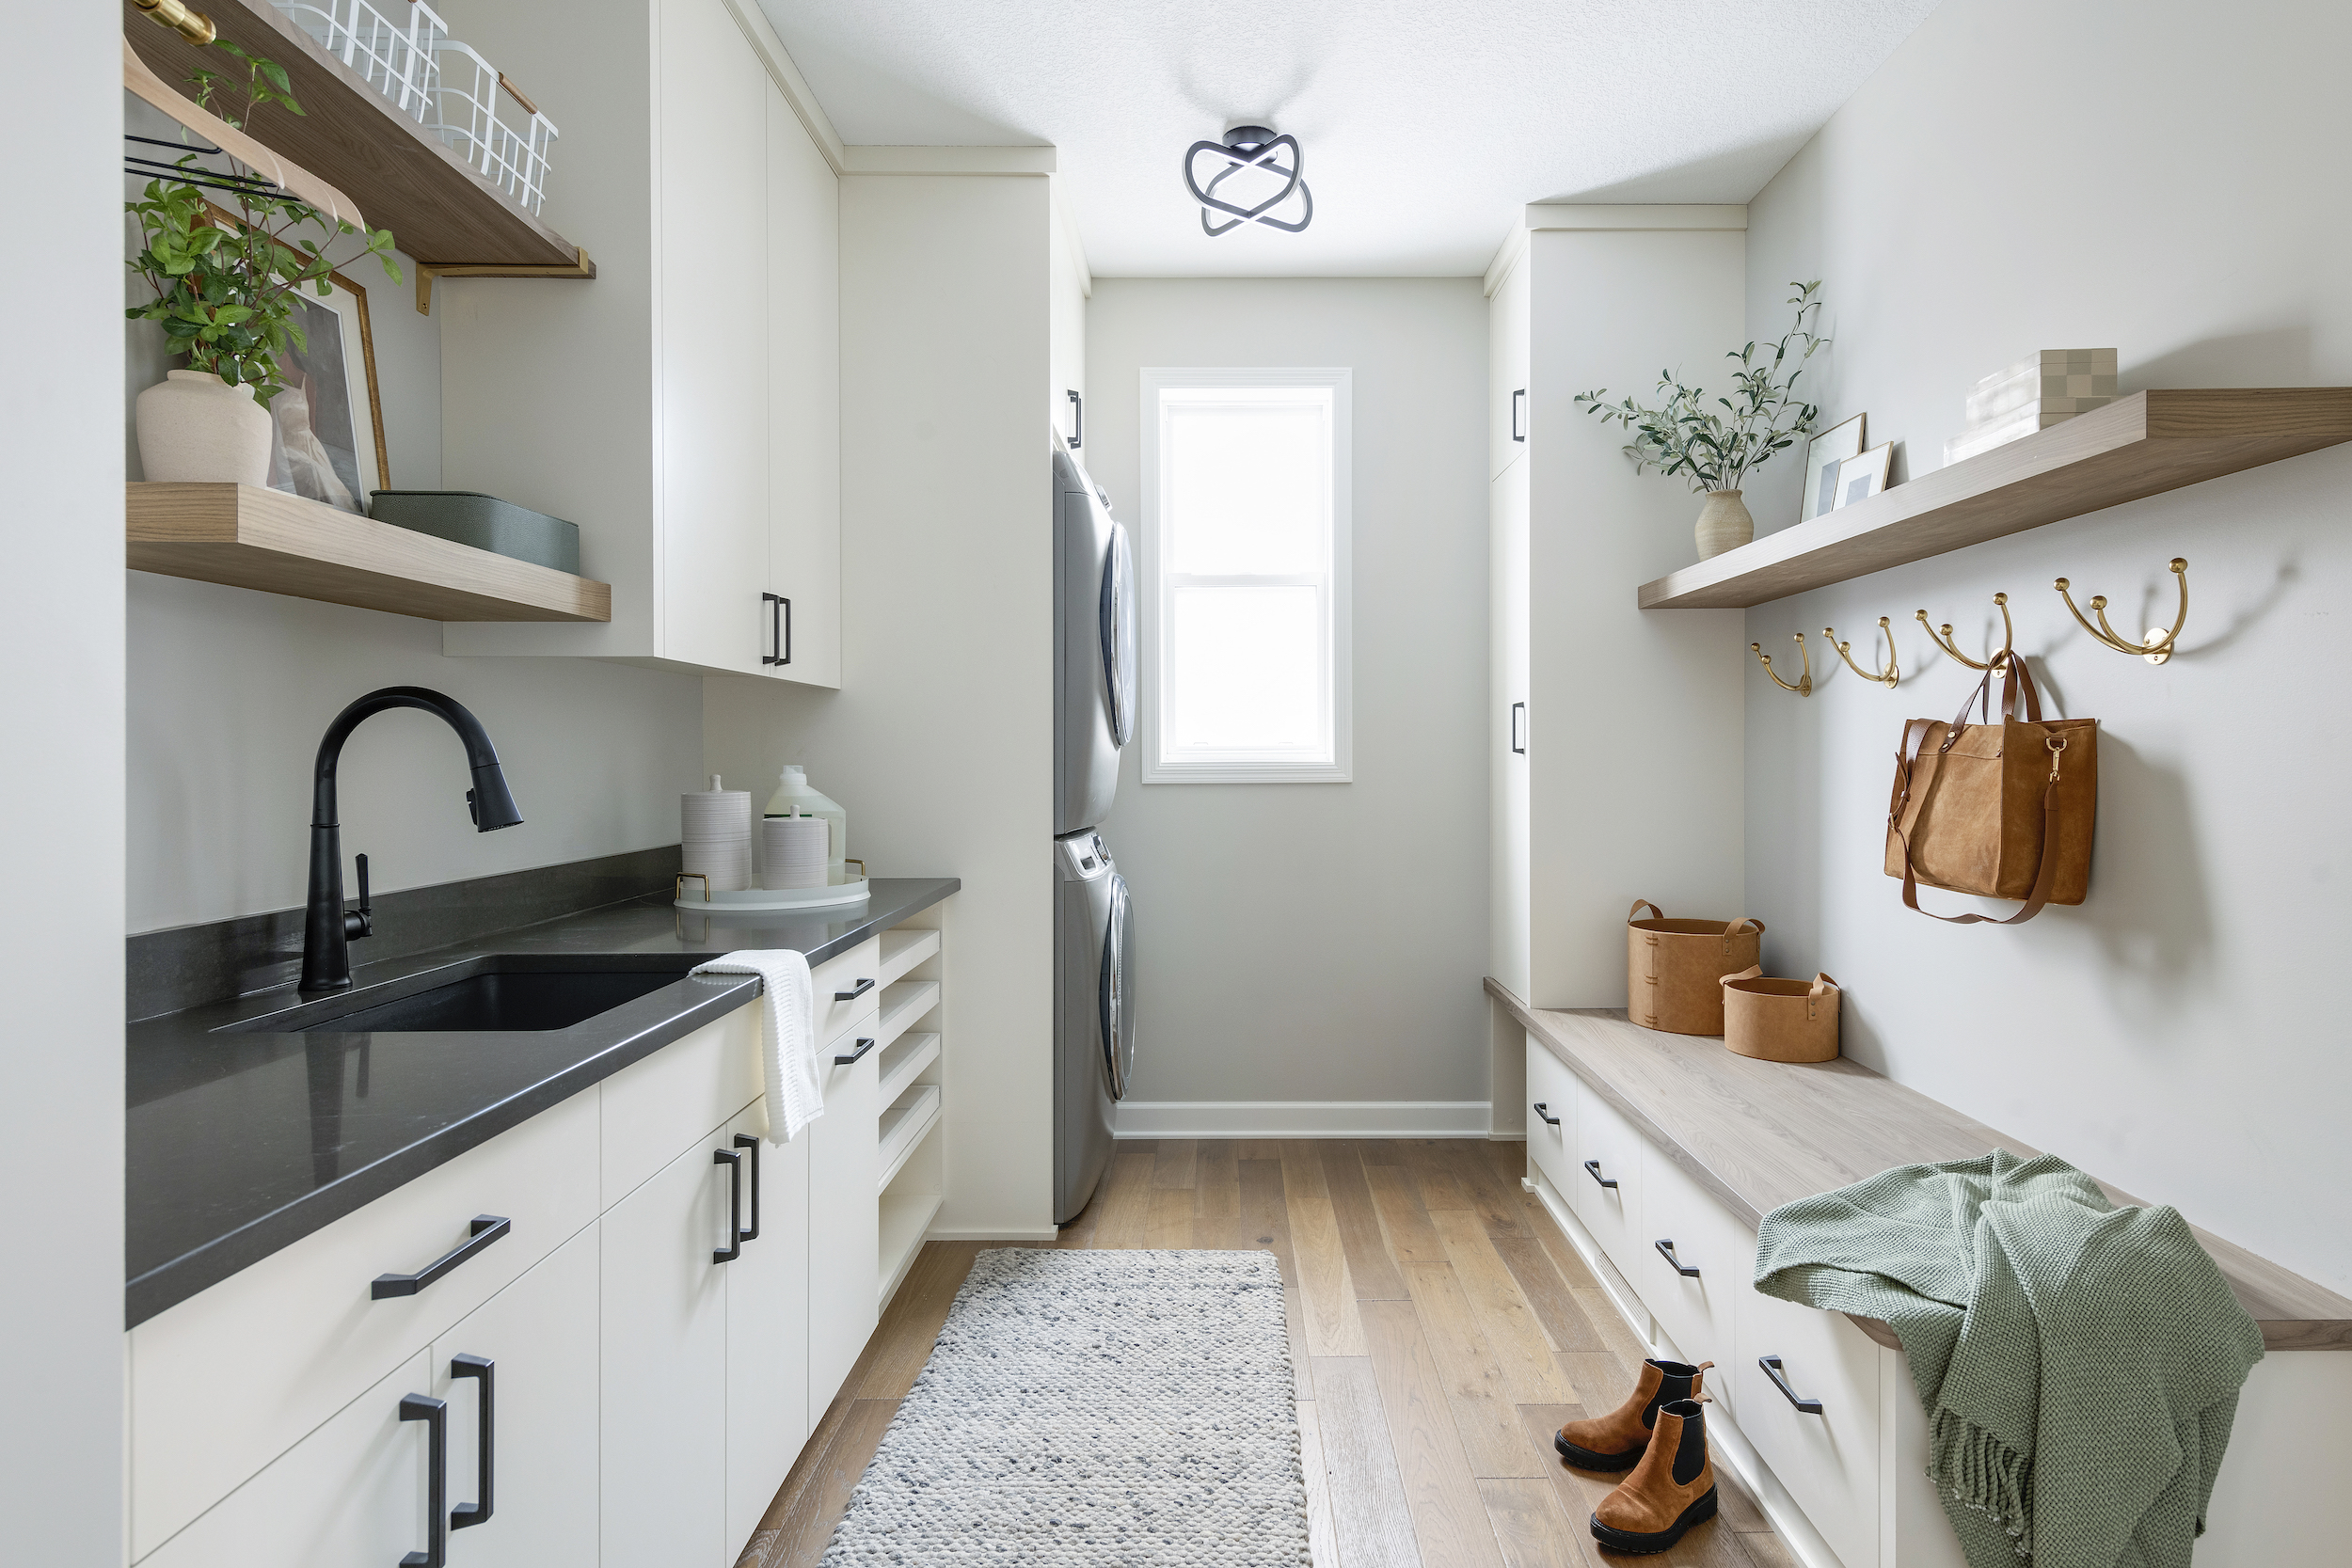 Mudroom/laundry room ideas with black countertop and natural light.